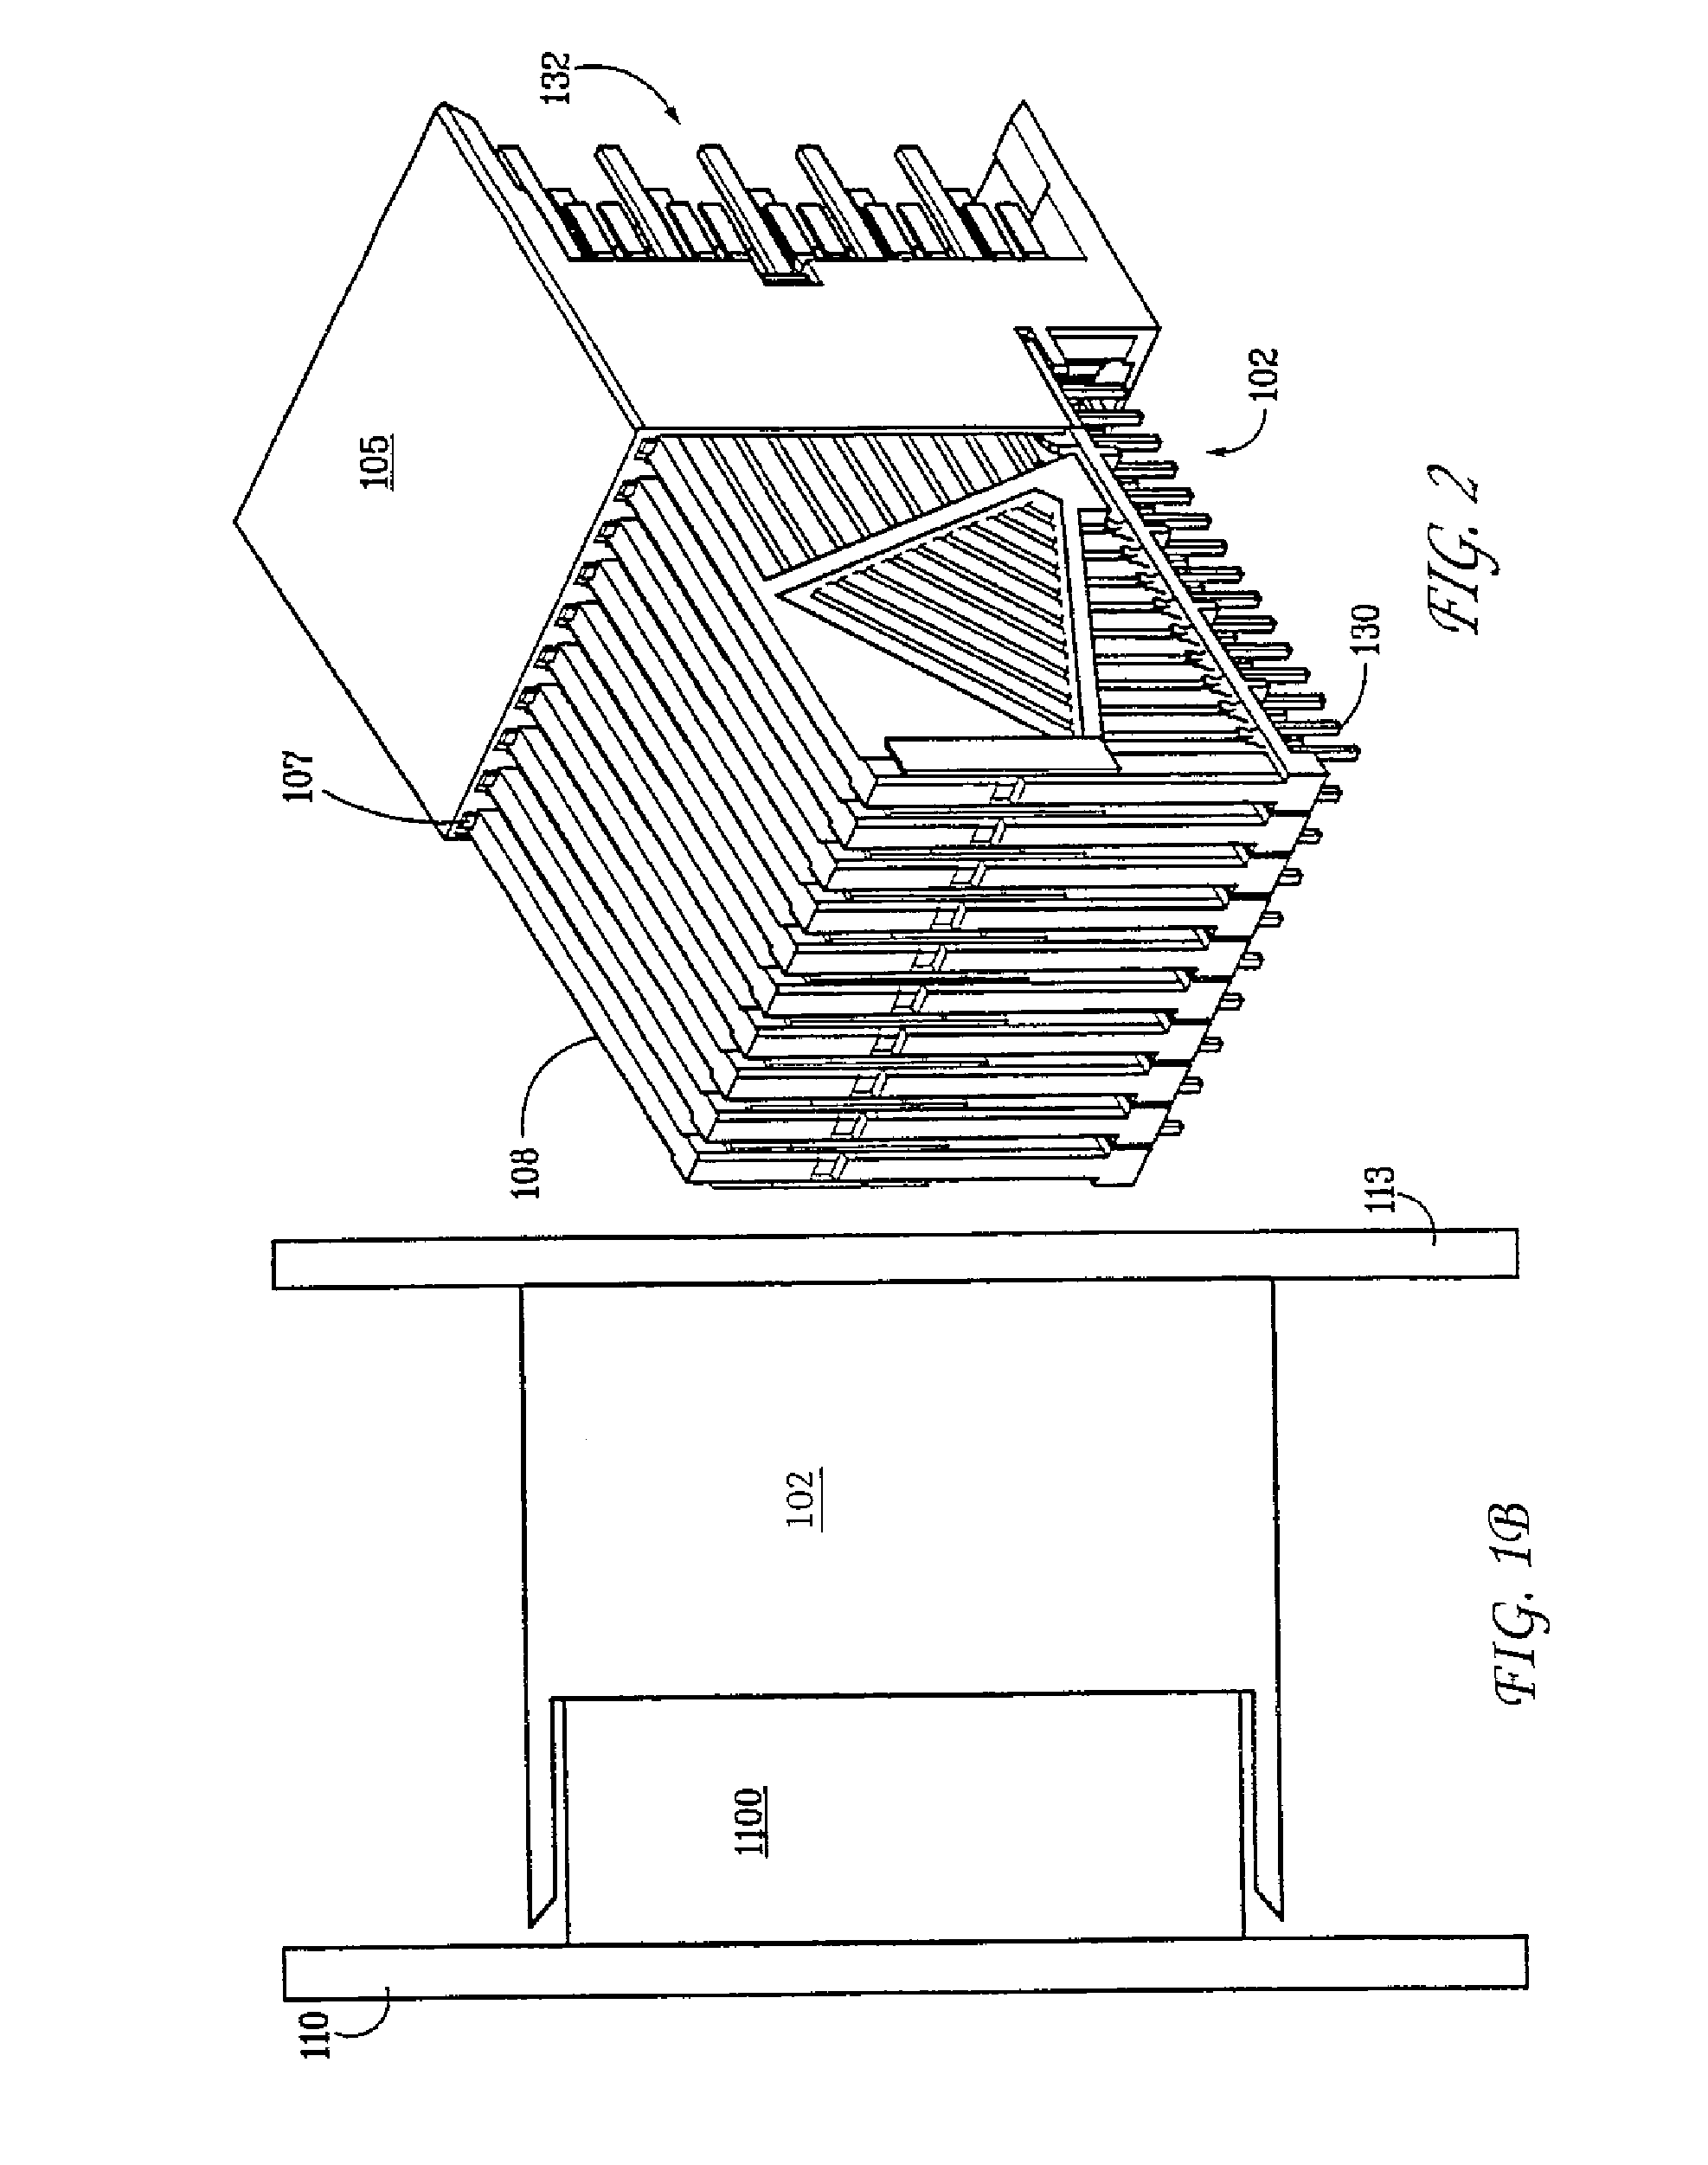 Electrical connector with load bearing features